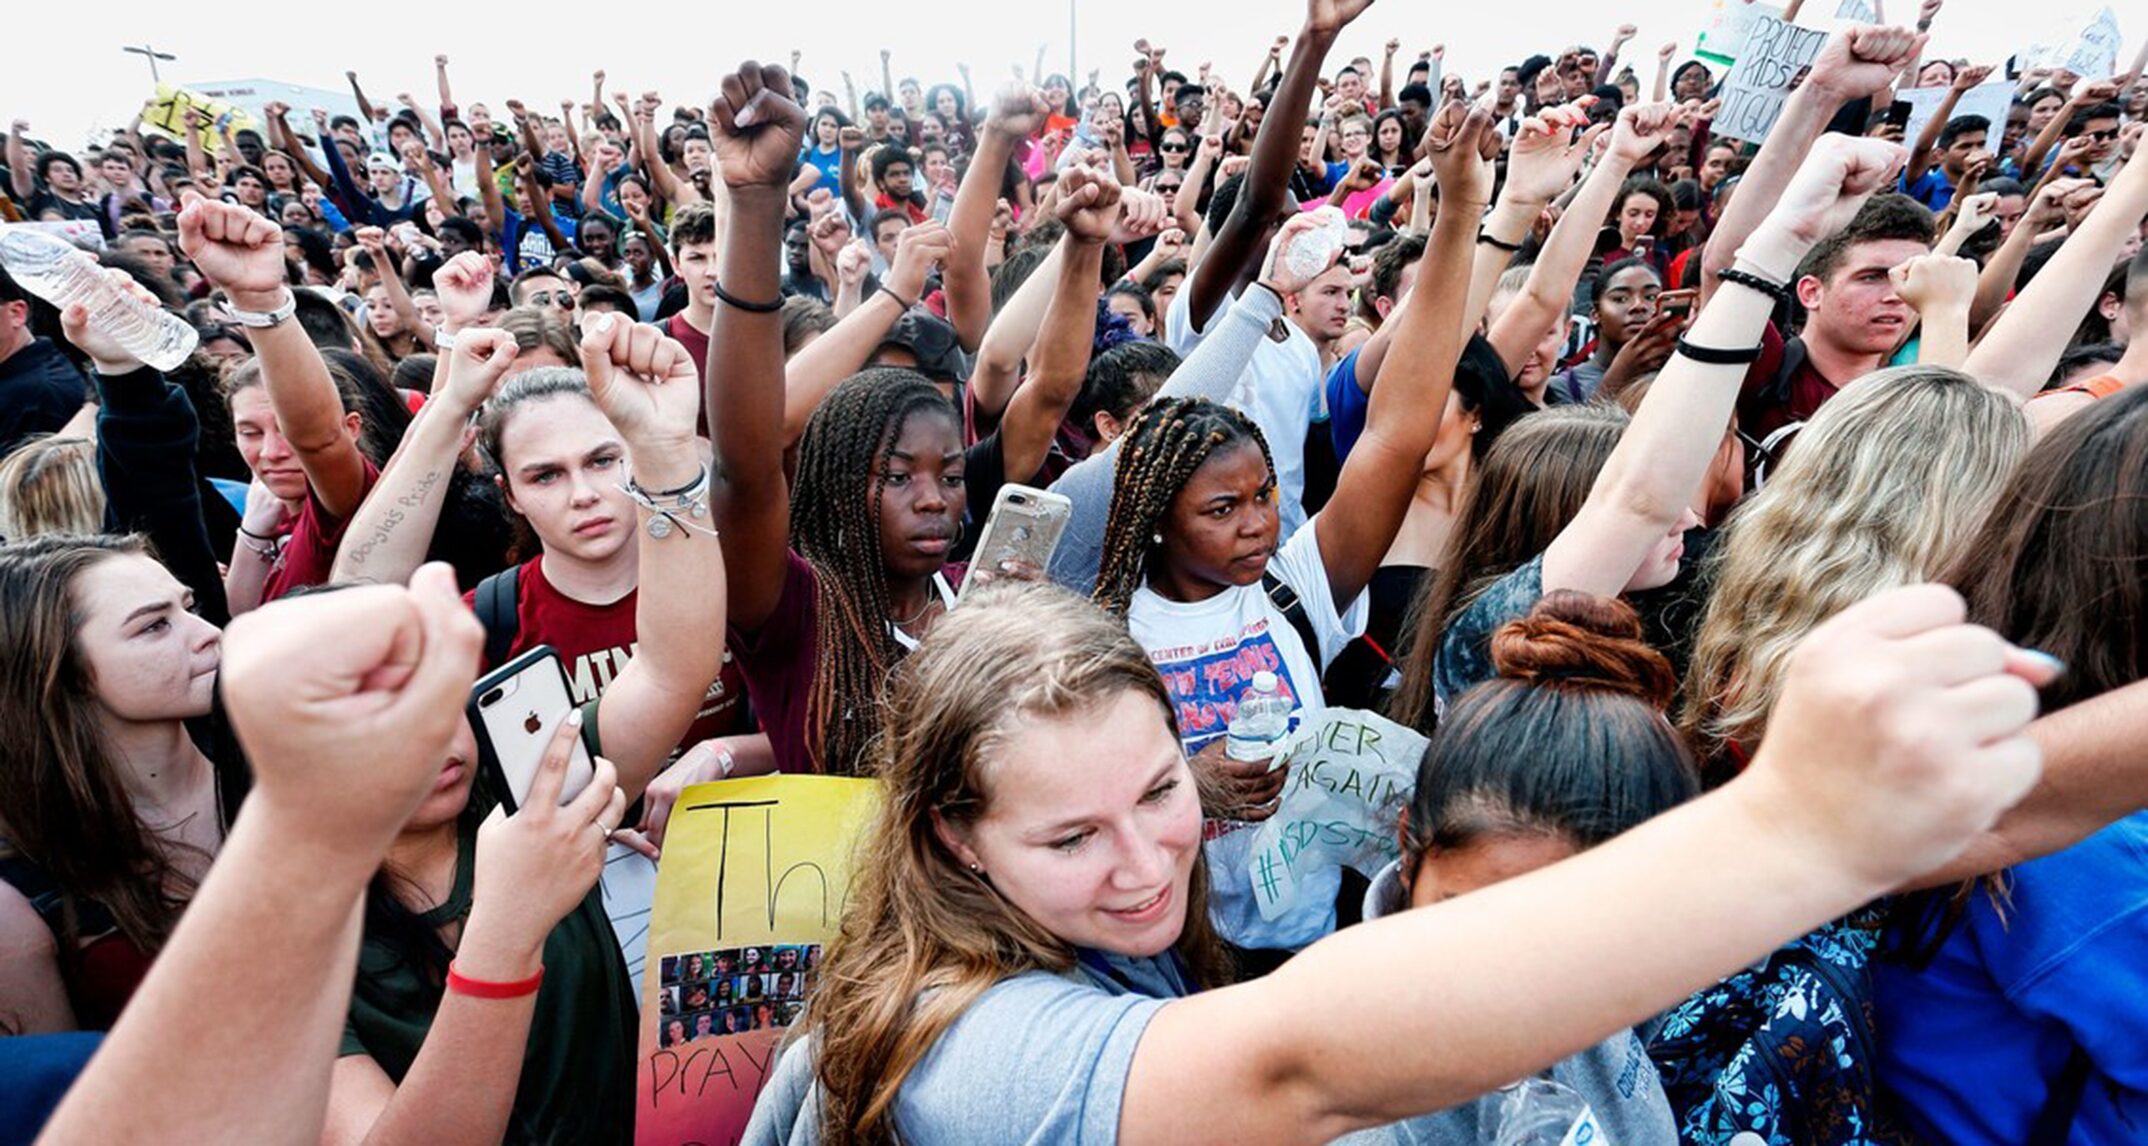 Following the Parkland shooting, students from Marjory Stoneman
Douglas High School have become young activists, organizing protests and
demanding action on school safety and gun reform. Photo courtesy of Rhona
Wise/Getty Images